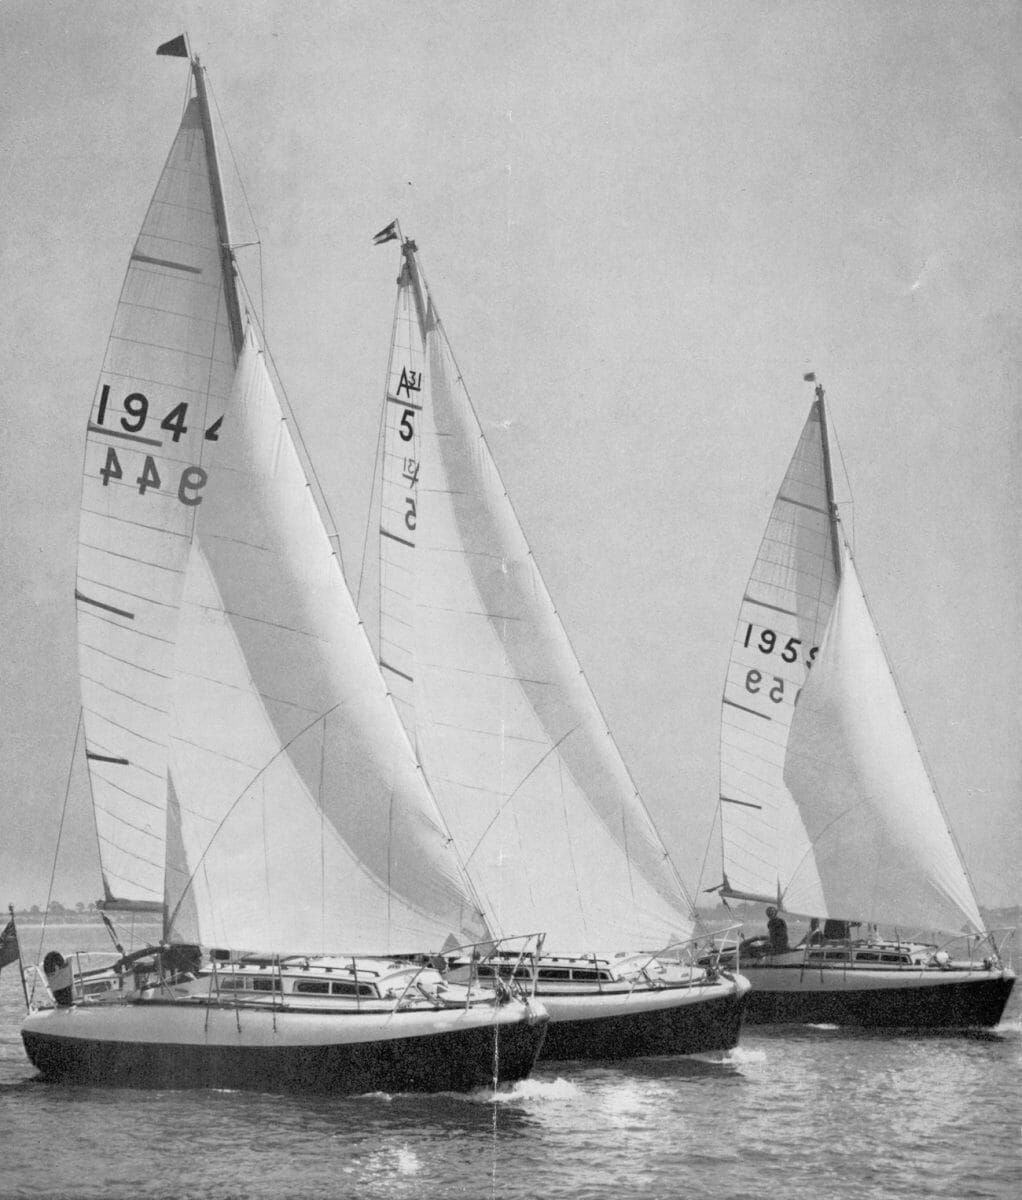 31-02 (1944) 31-05 and 31-06 (1959) Sailing together for publicity shots